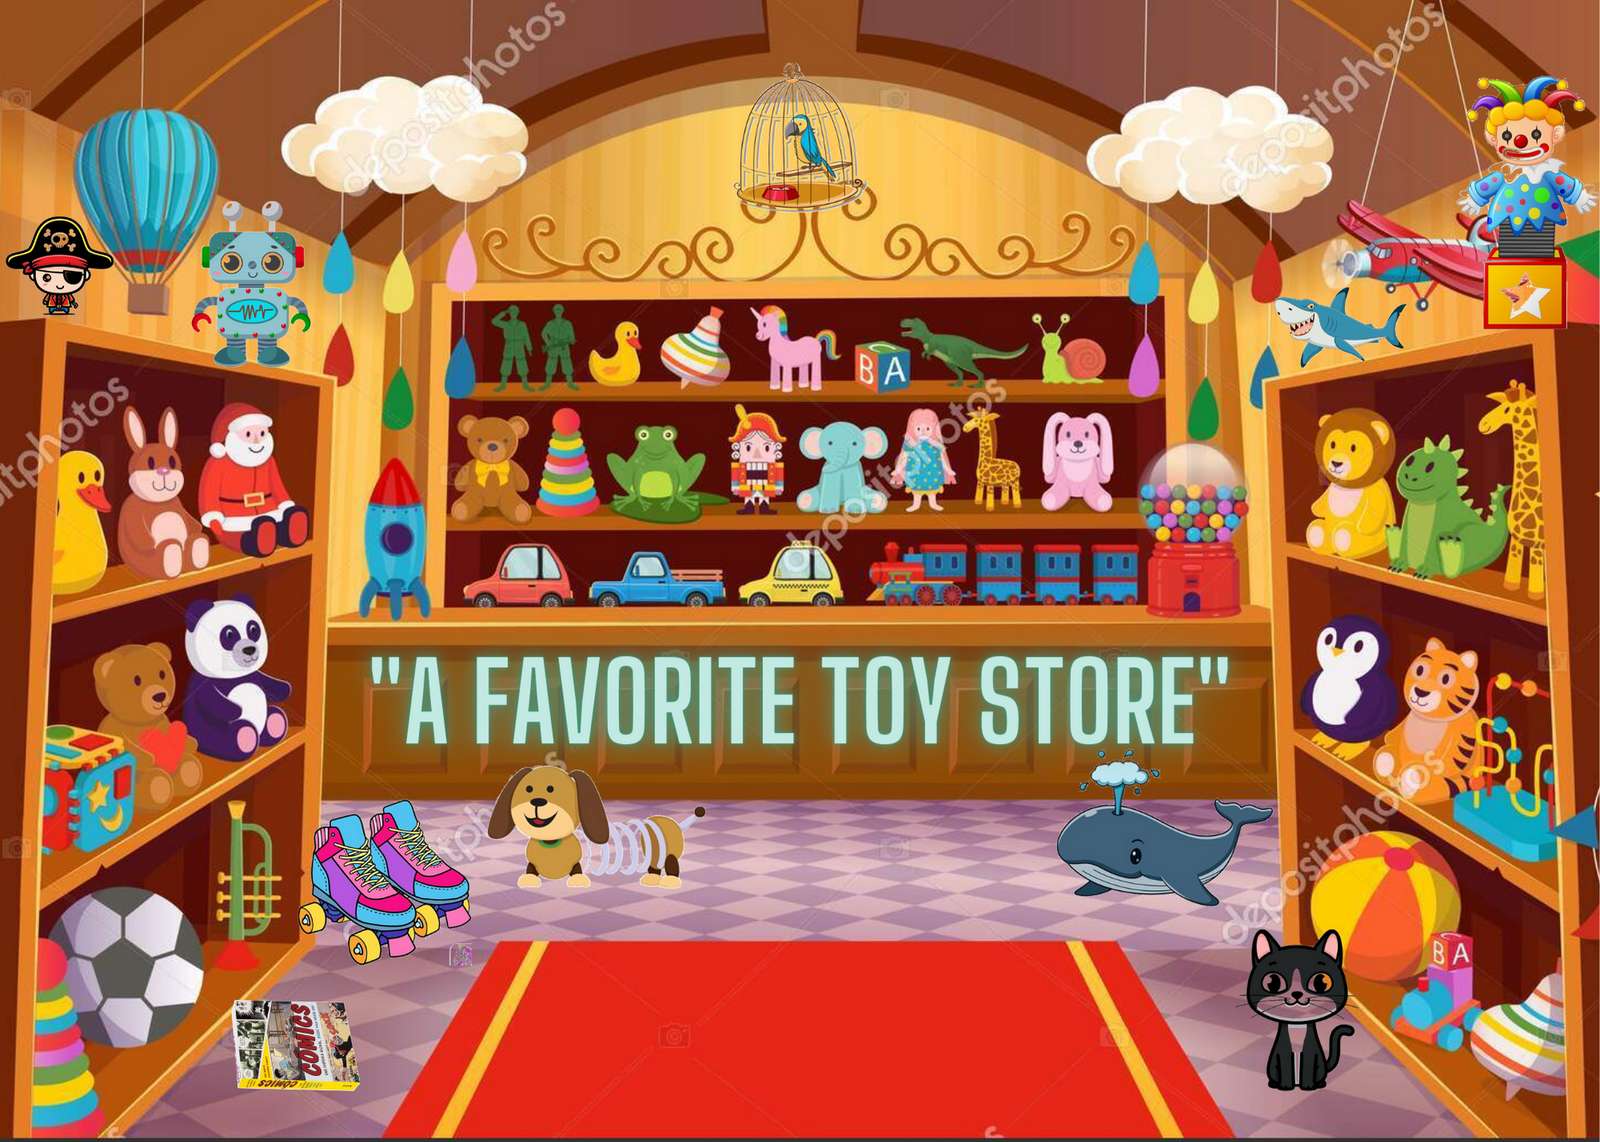 A favorite toy store jigsaw puzzle online